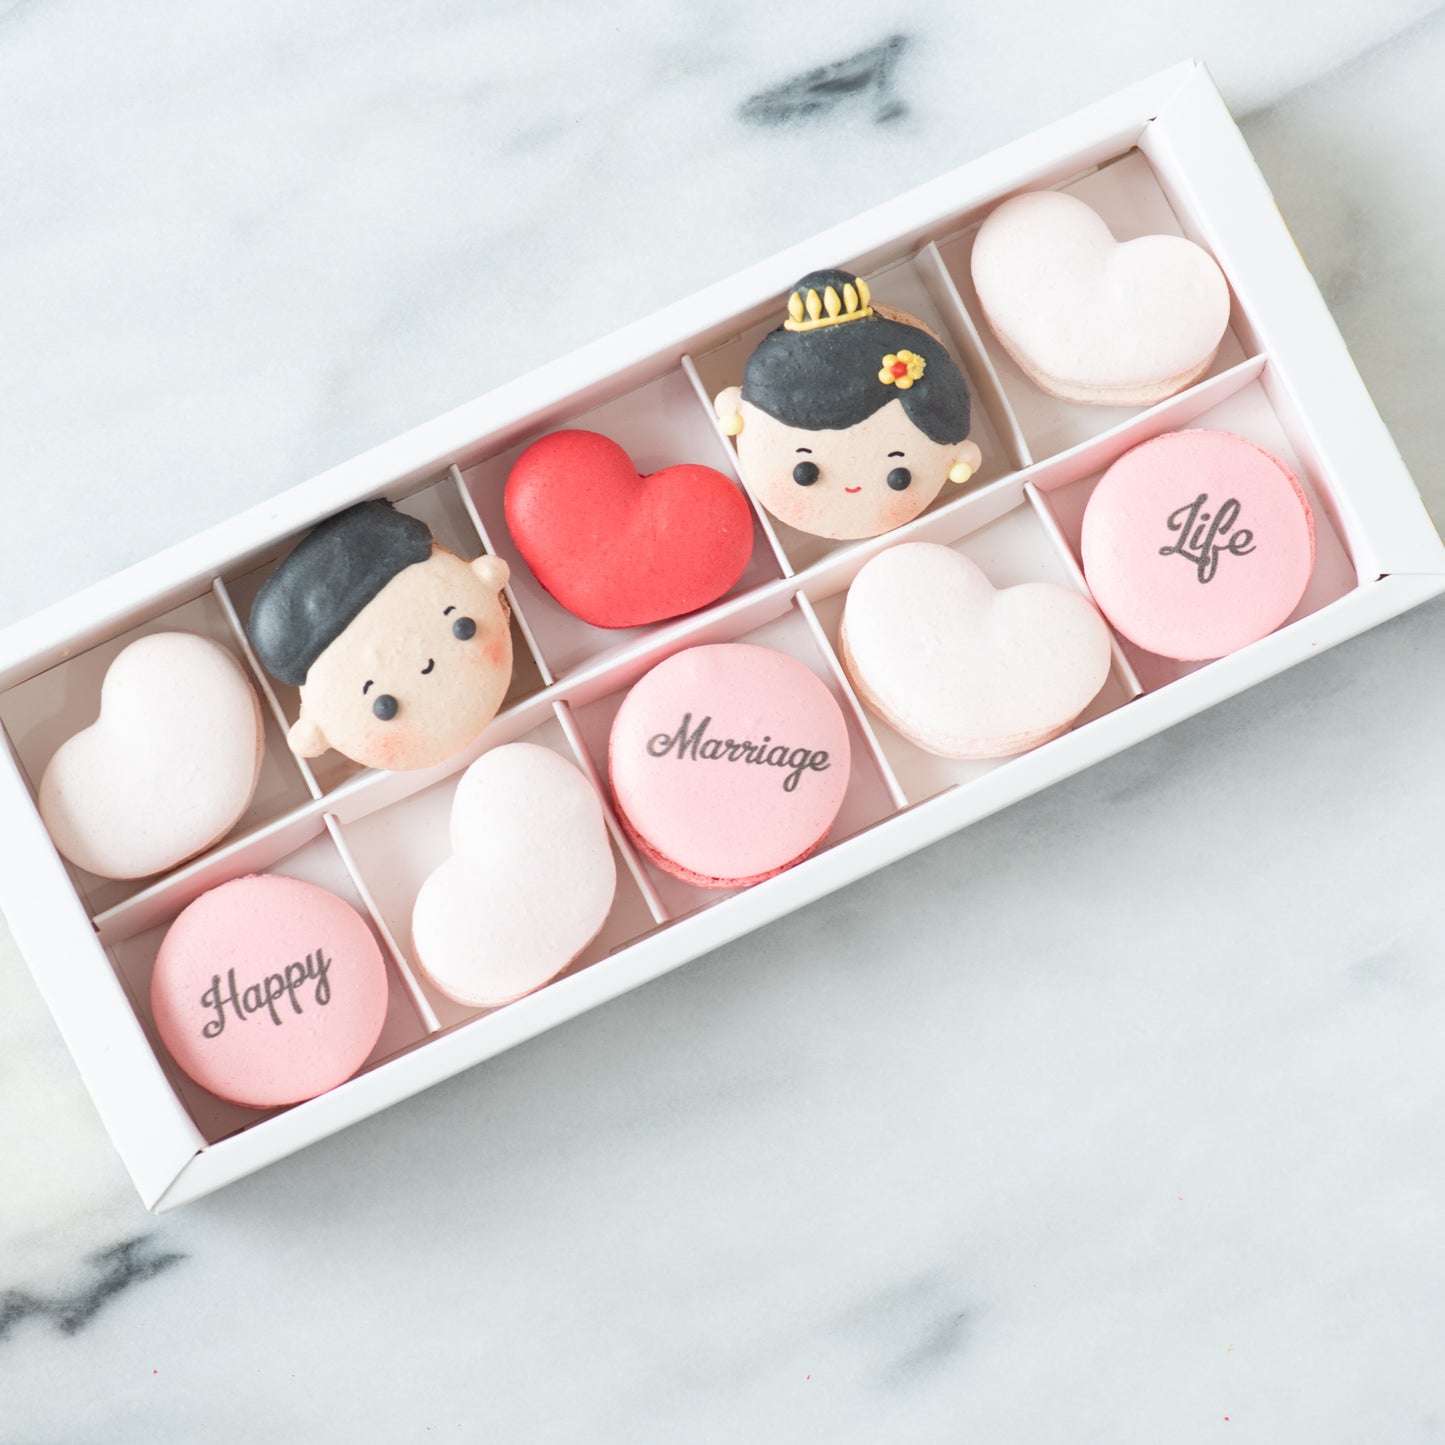 10 pcs Traditional Malay Wedding Couple Macarons in a Gift Box | Complimentary Ribbon and Personalised Message | $38.80 Nett